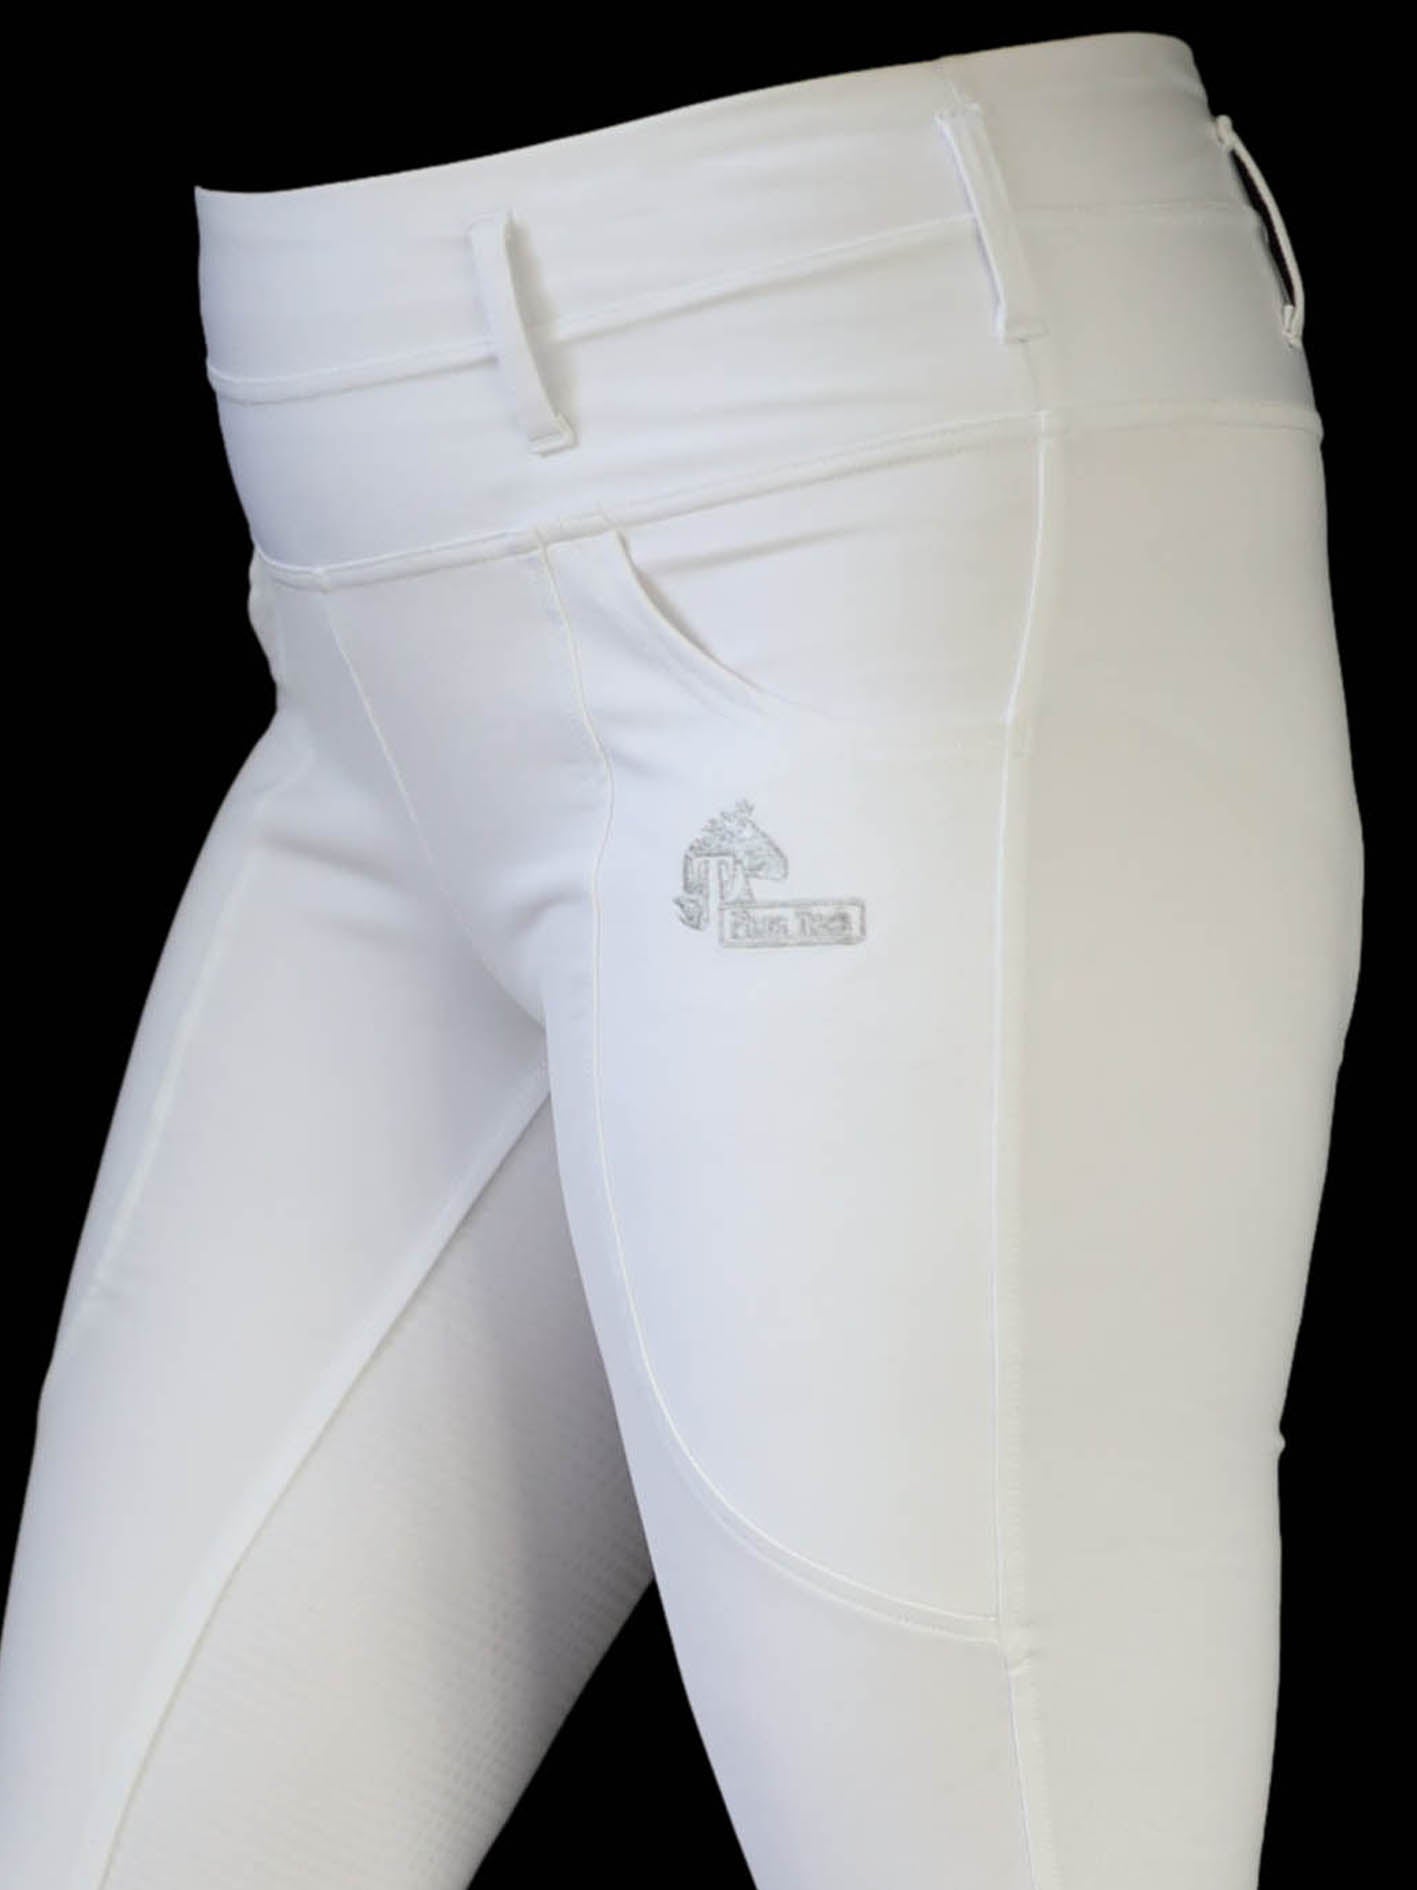 White riding tights showing wide waistband and logo on phone pocket